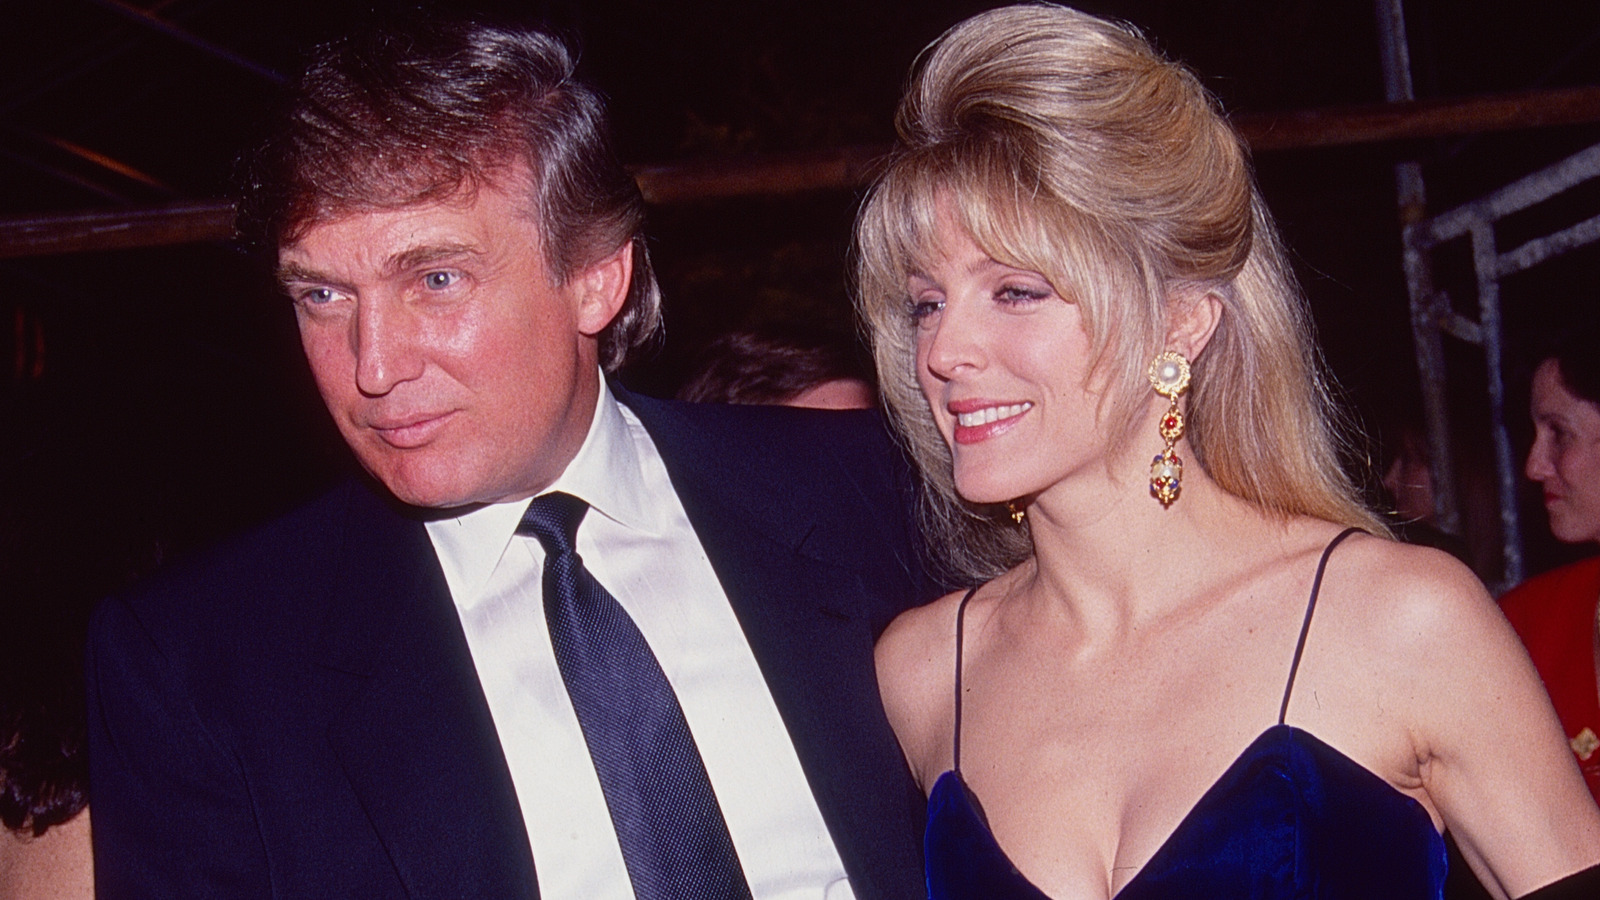 This famous singer allegedly almost stole Marla Maples from Donald Trump